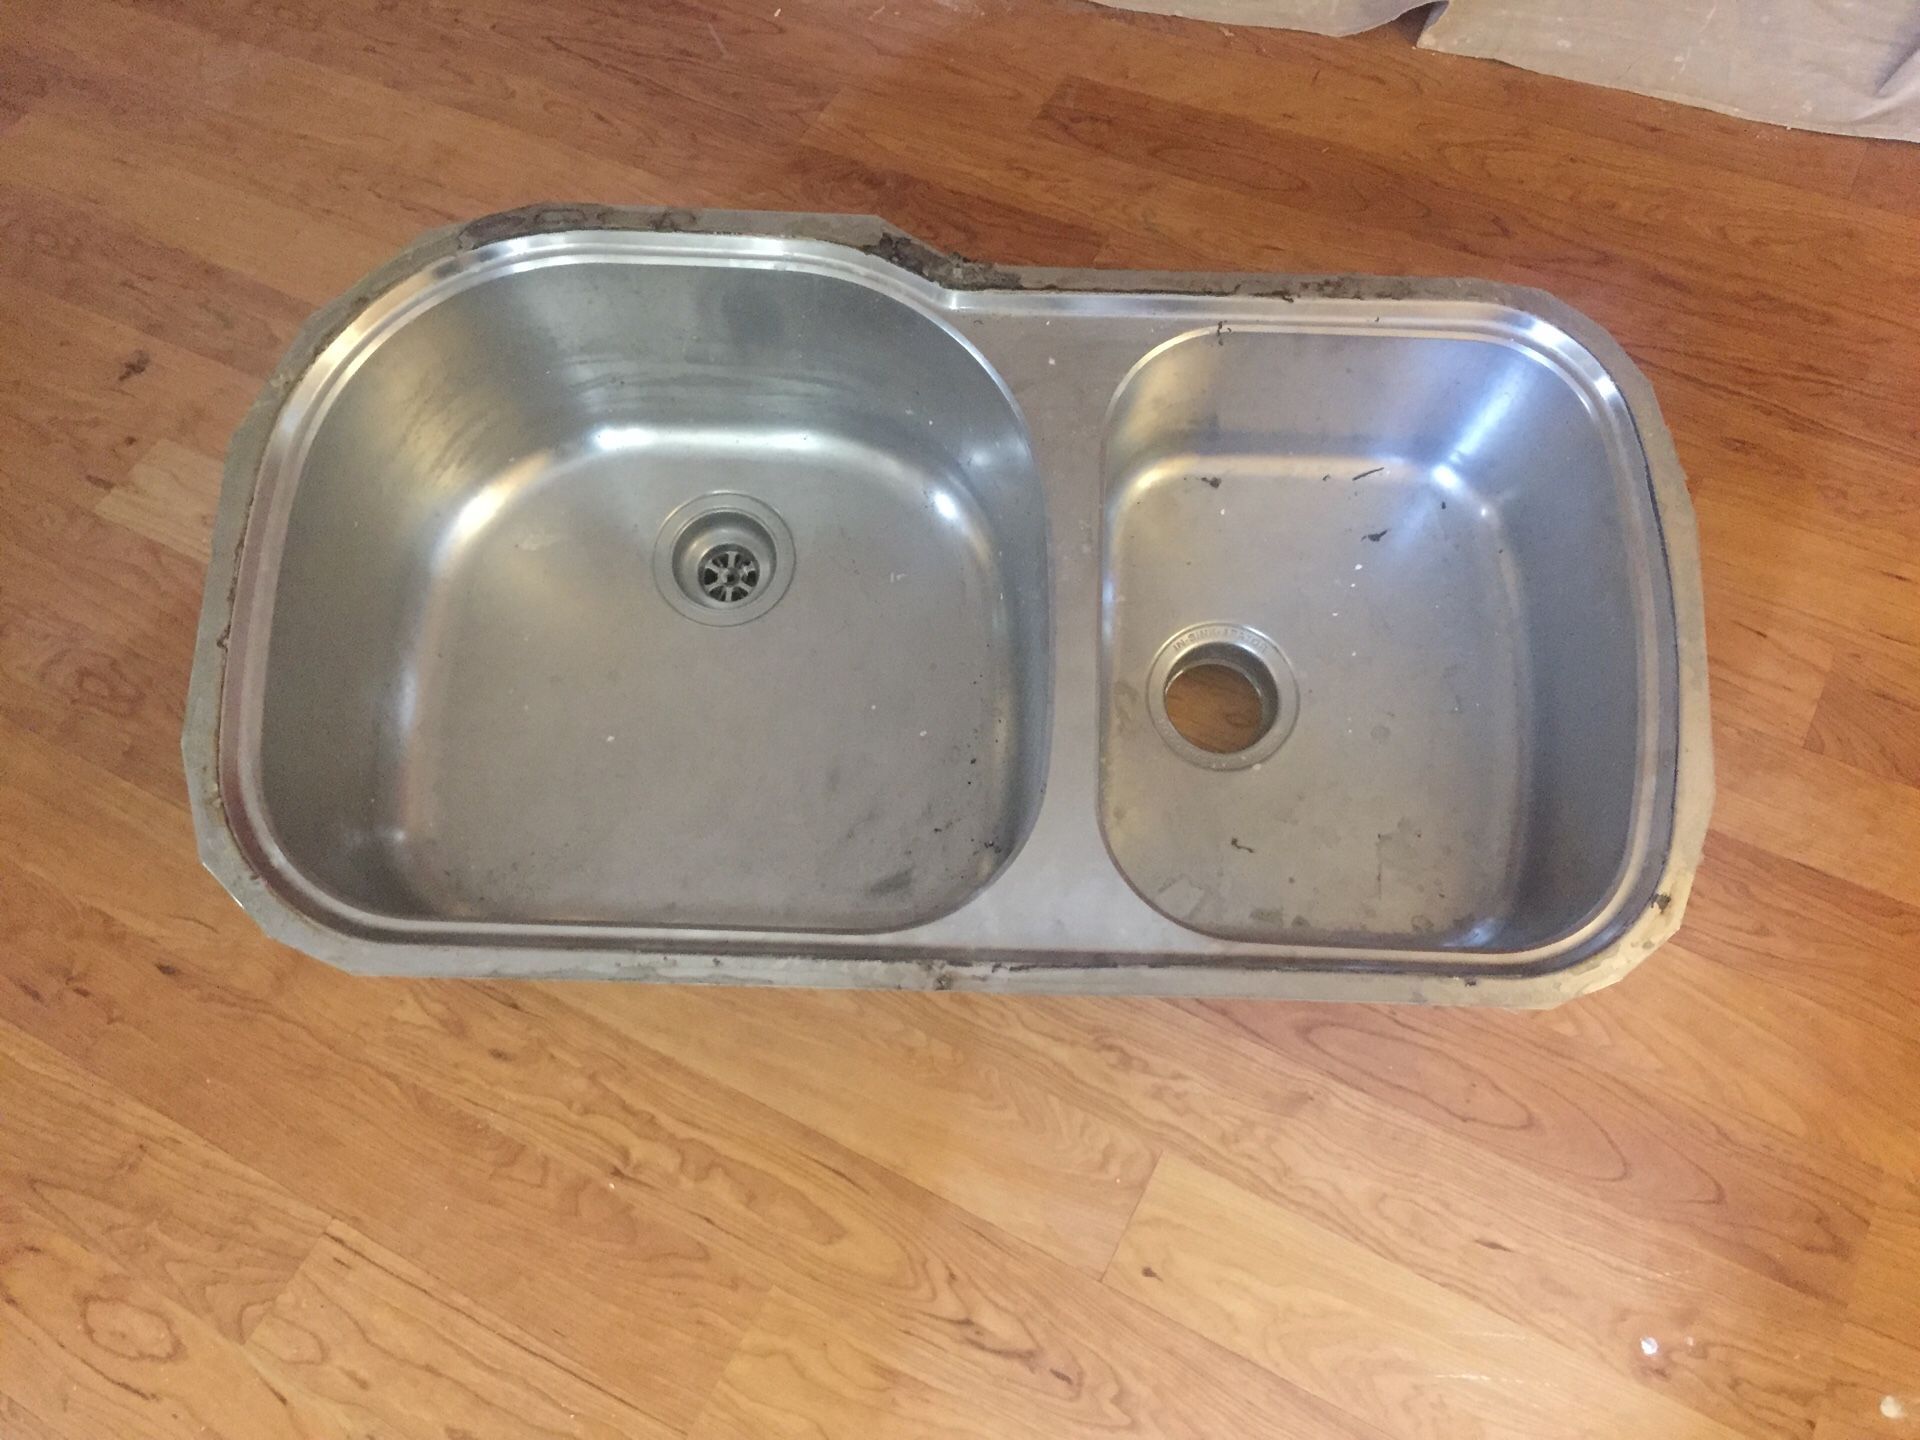 FREE black granite counter top and stainless steel double sink for only $25!!